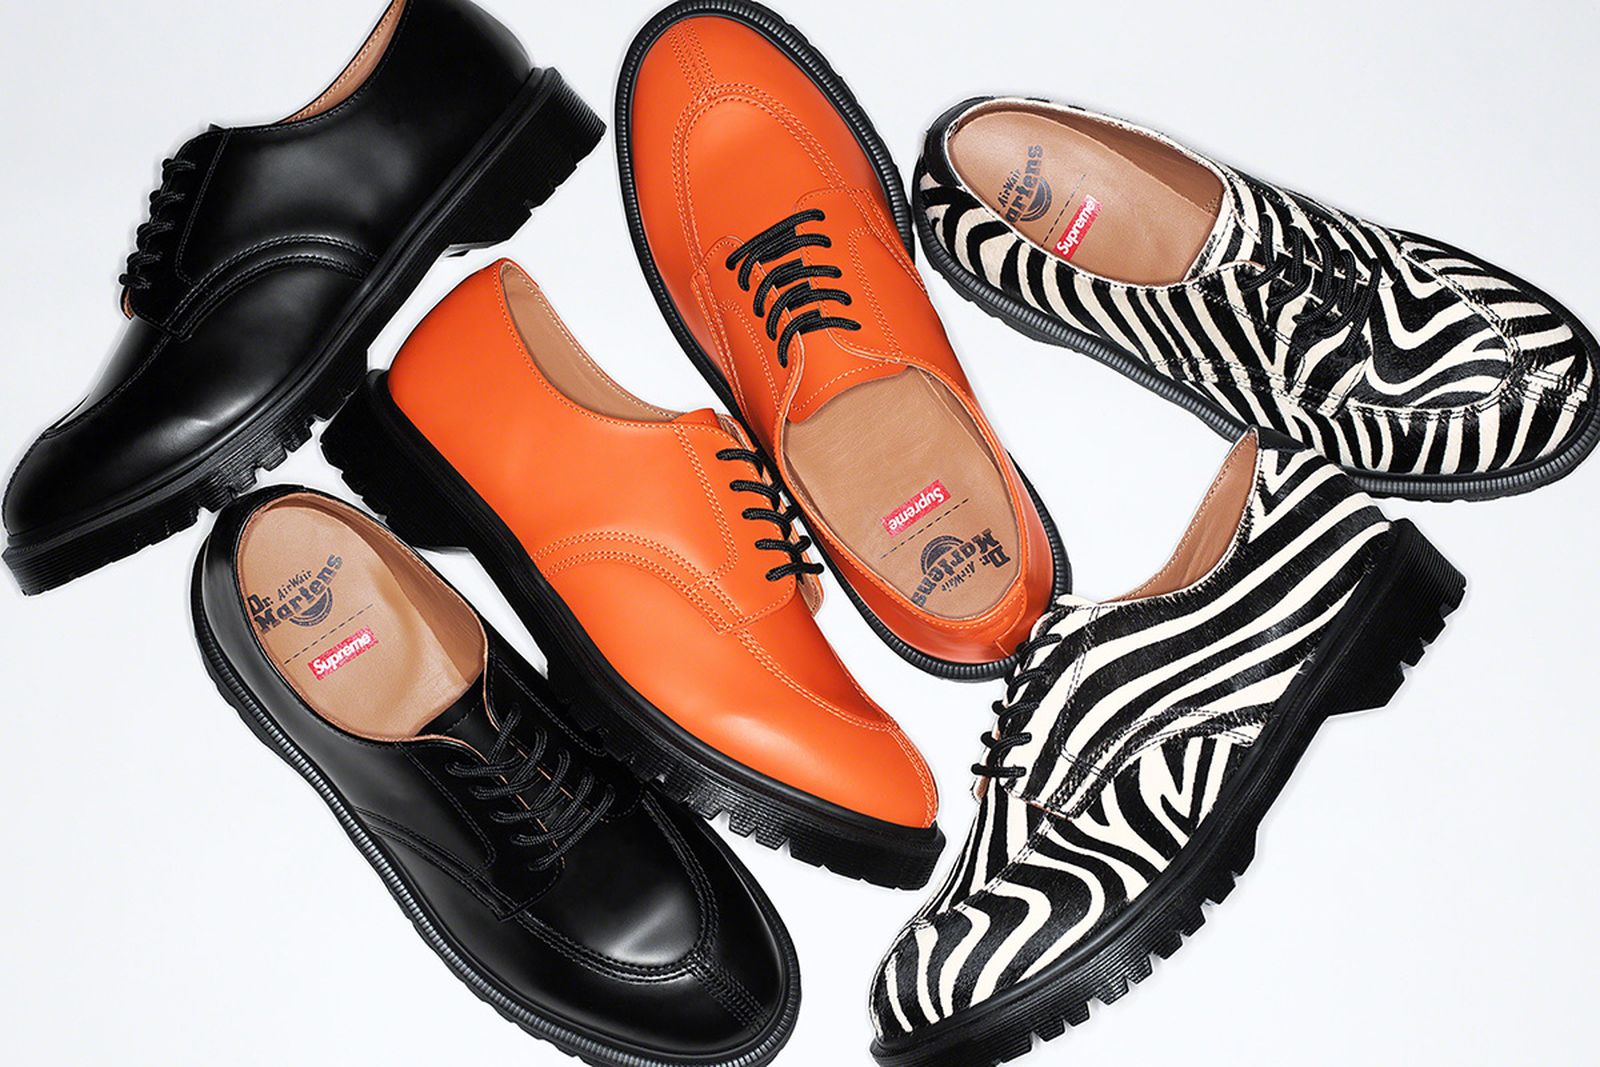 Supreme x Dr. Martens & Other Highlights From Today's Drop